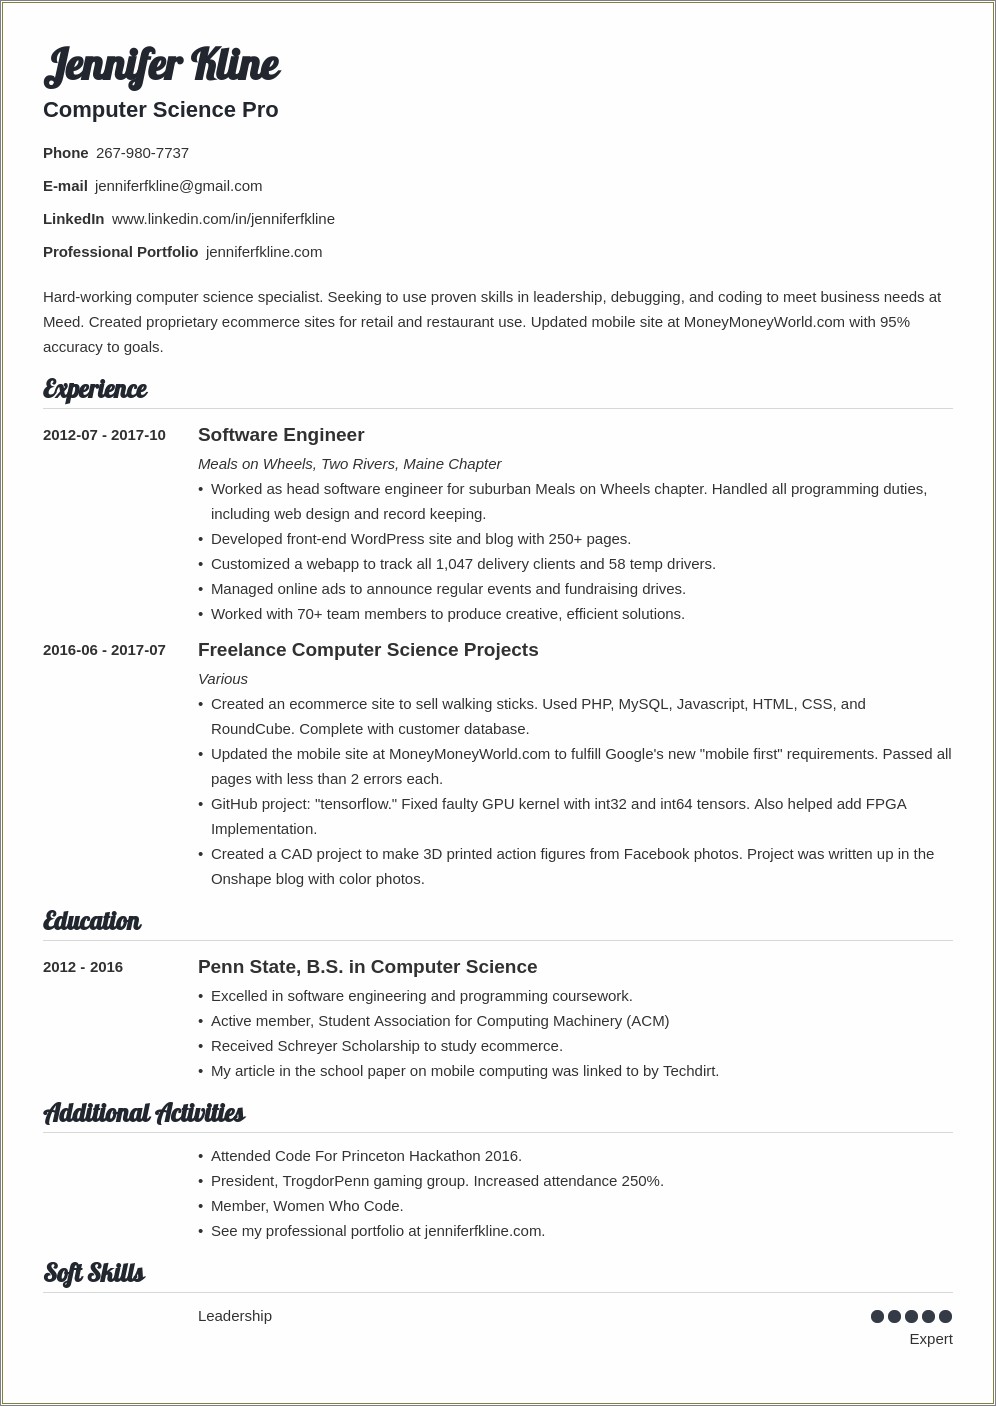 Is Volunteer Experience Important On A Resume